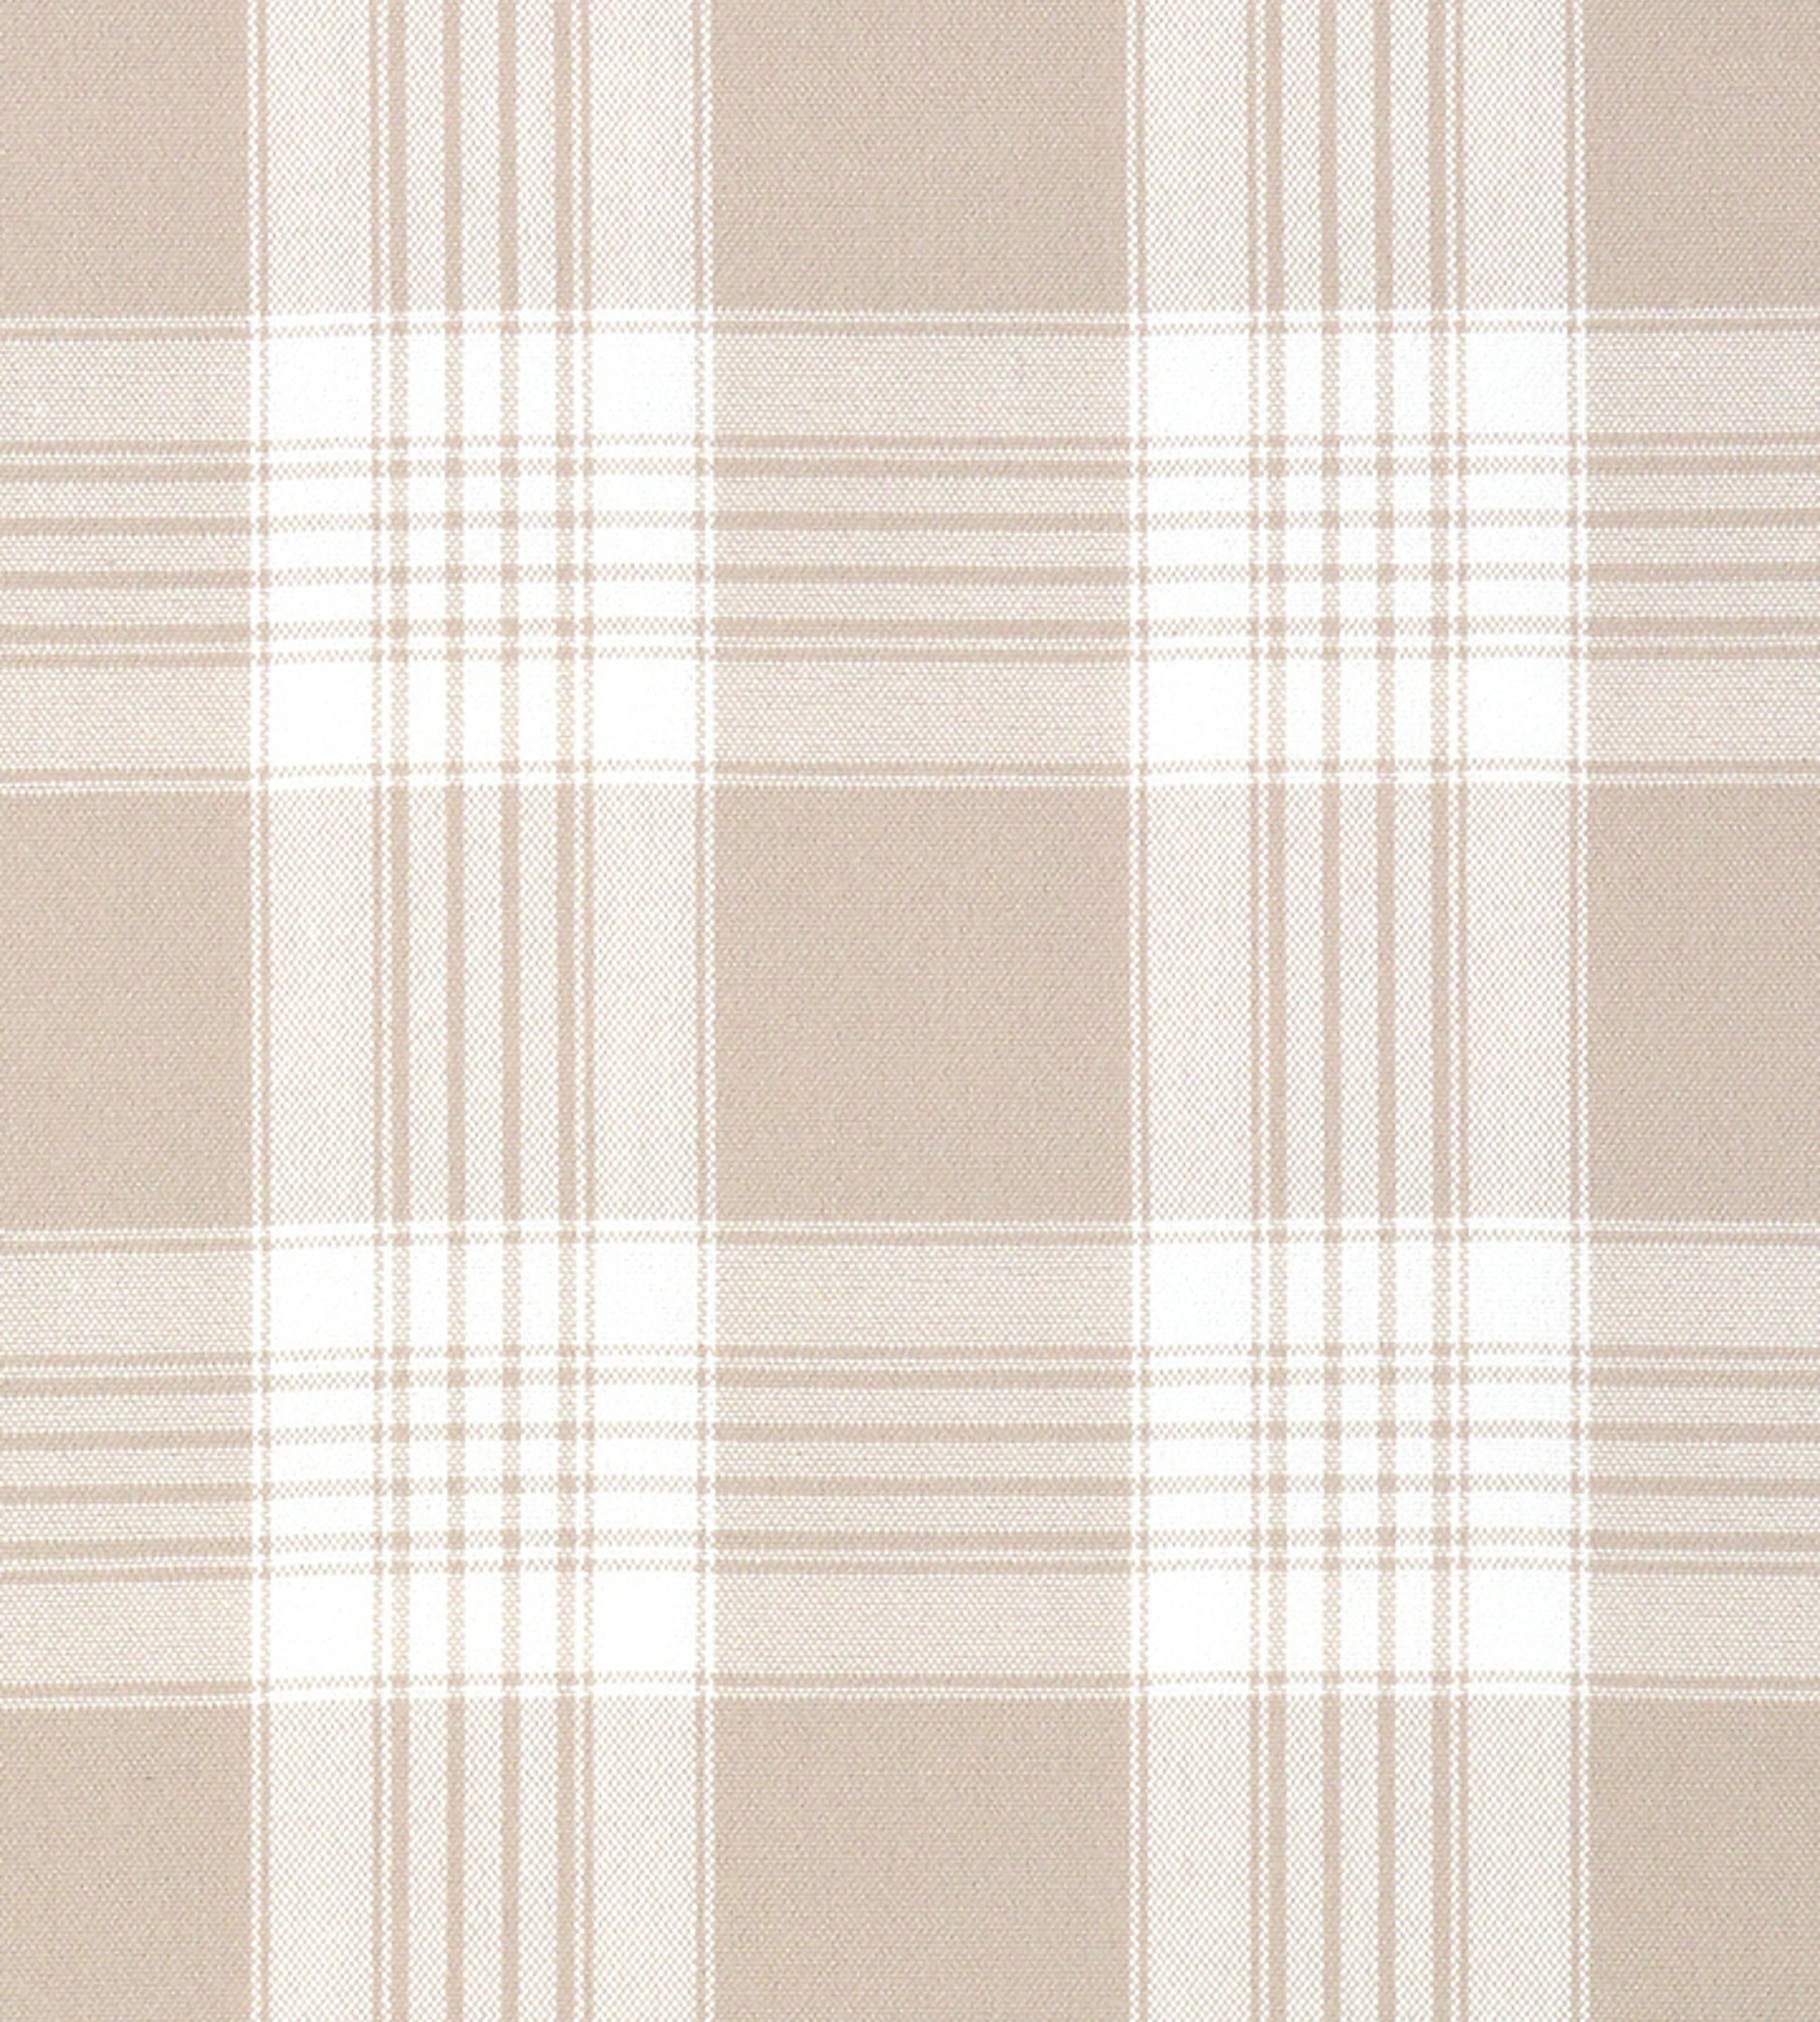 Purchase Old World Weavers Fabric Pattern number F3 00013020, Poker Plaid Sand 1